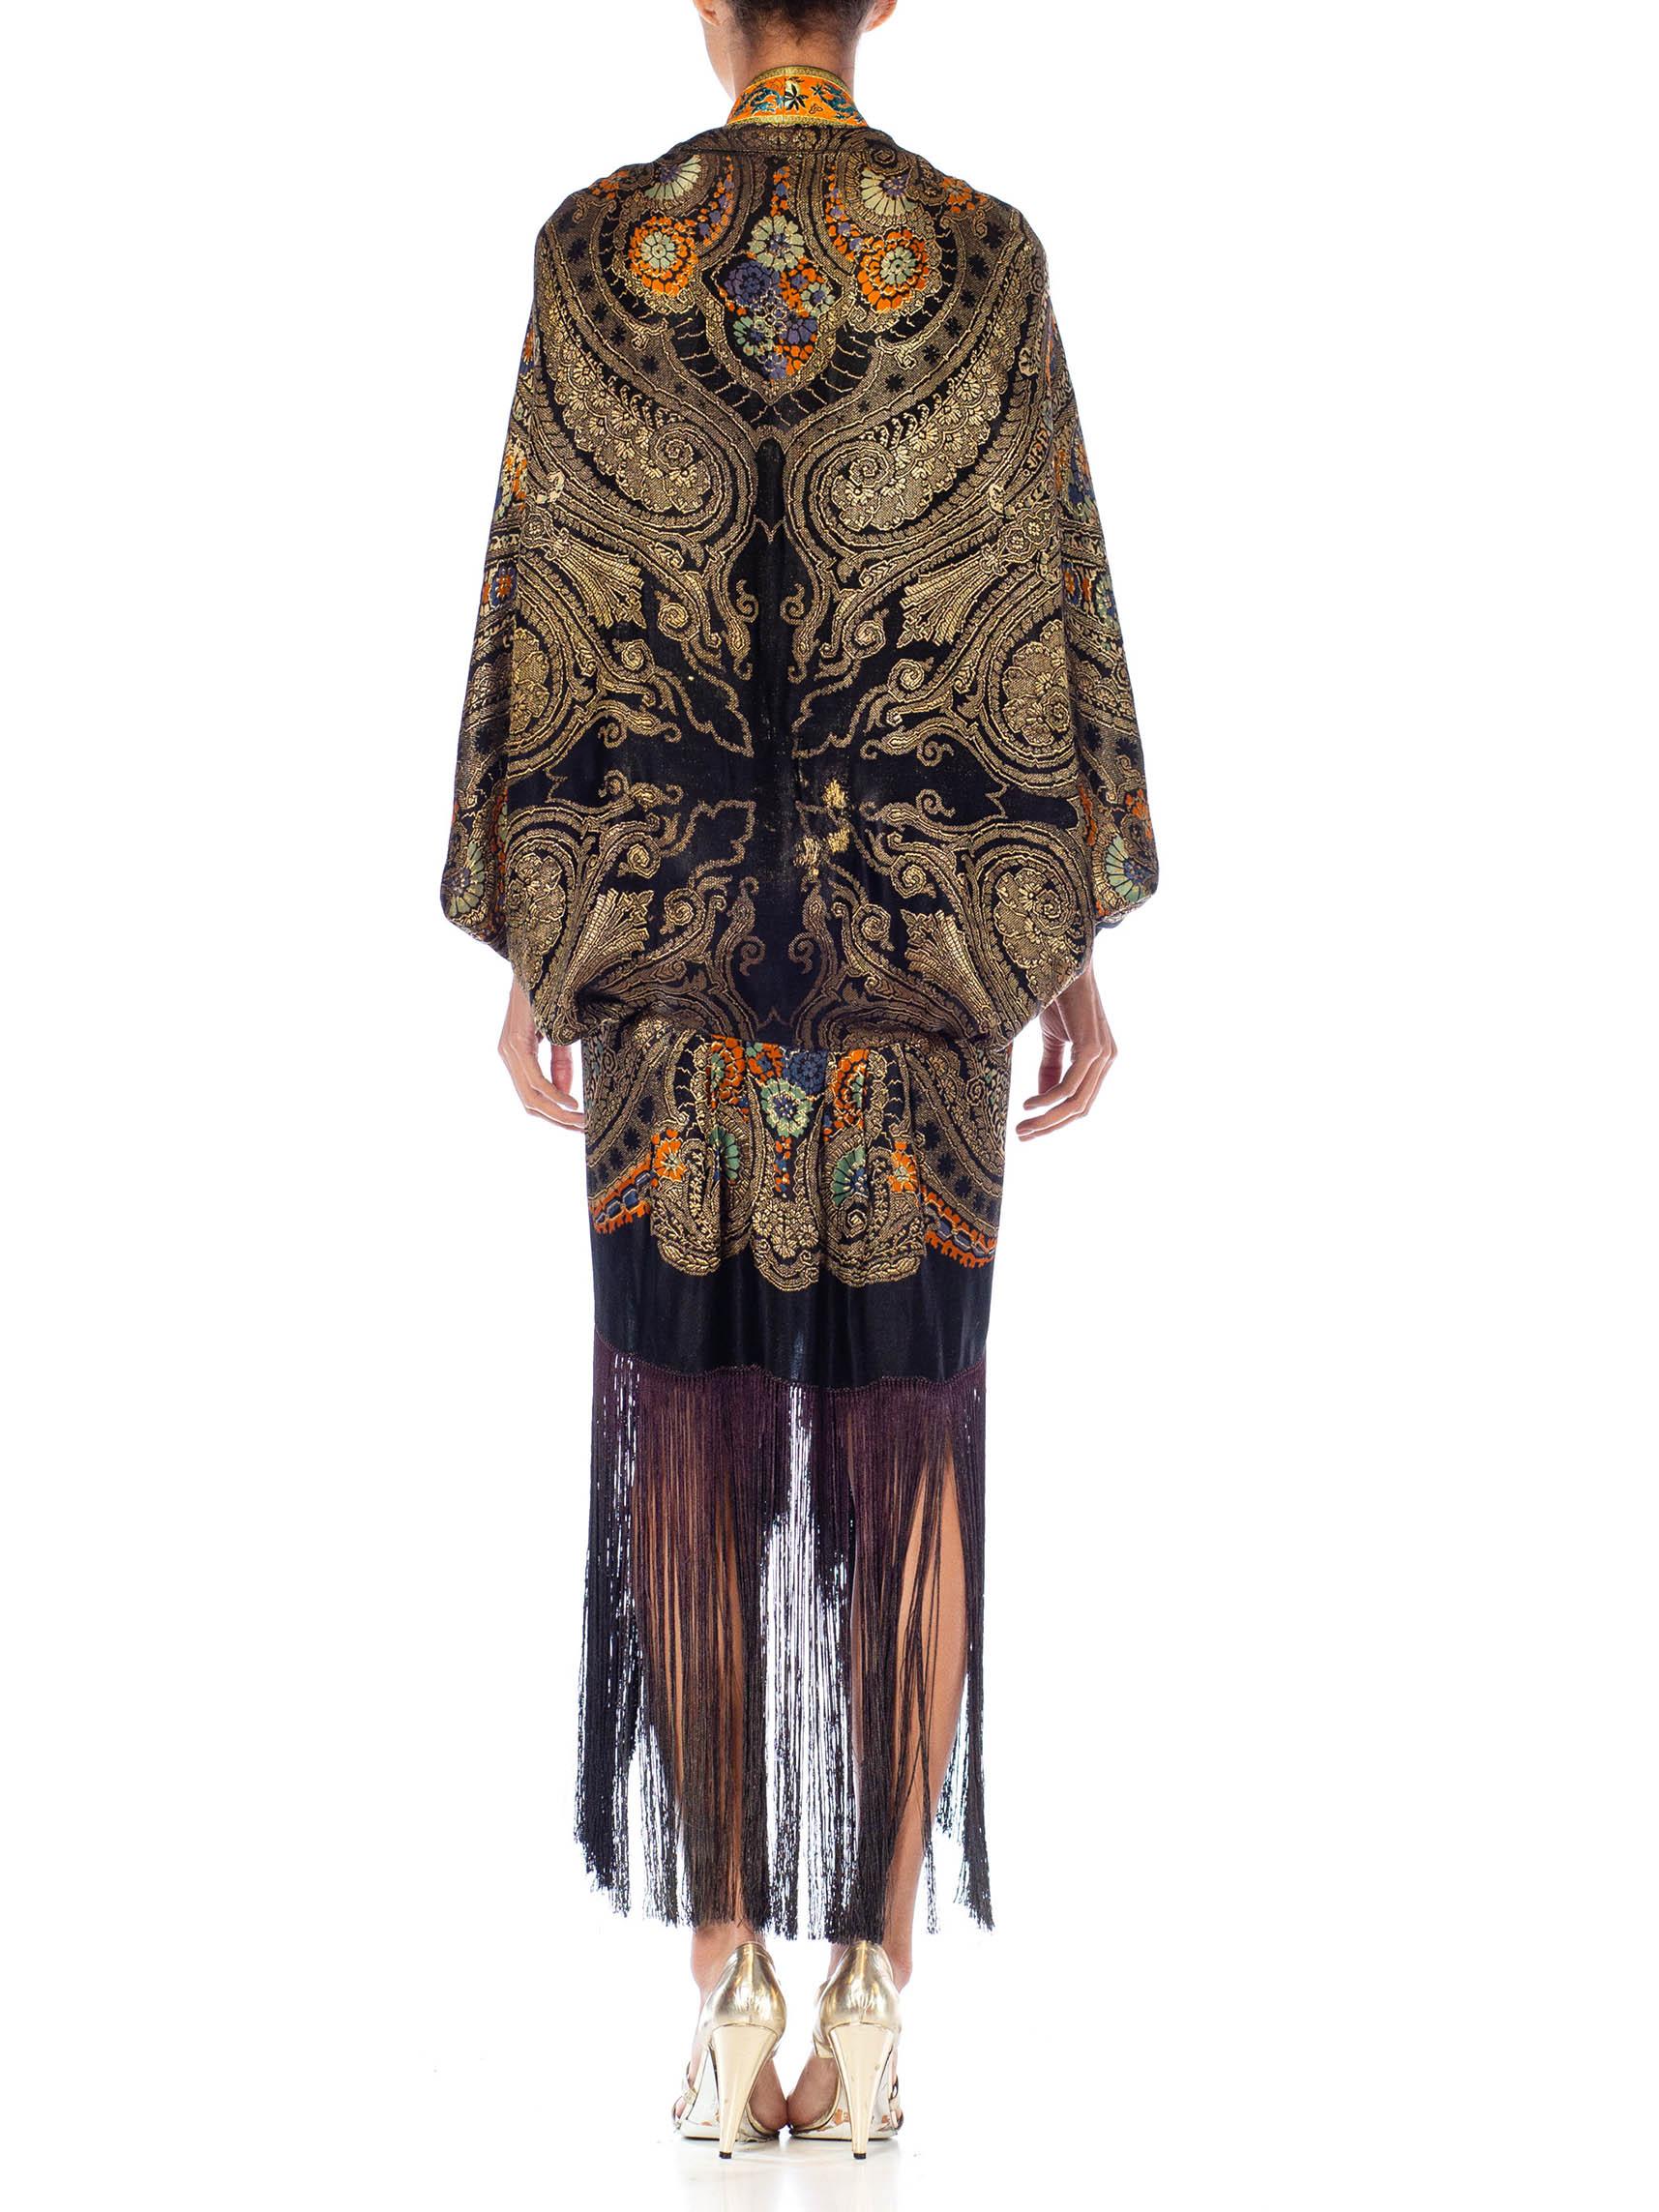 Morphew Collection Black, Orange & Gold Silk Lamé Floral Paisley Cocoon With Fr For Sale 5